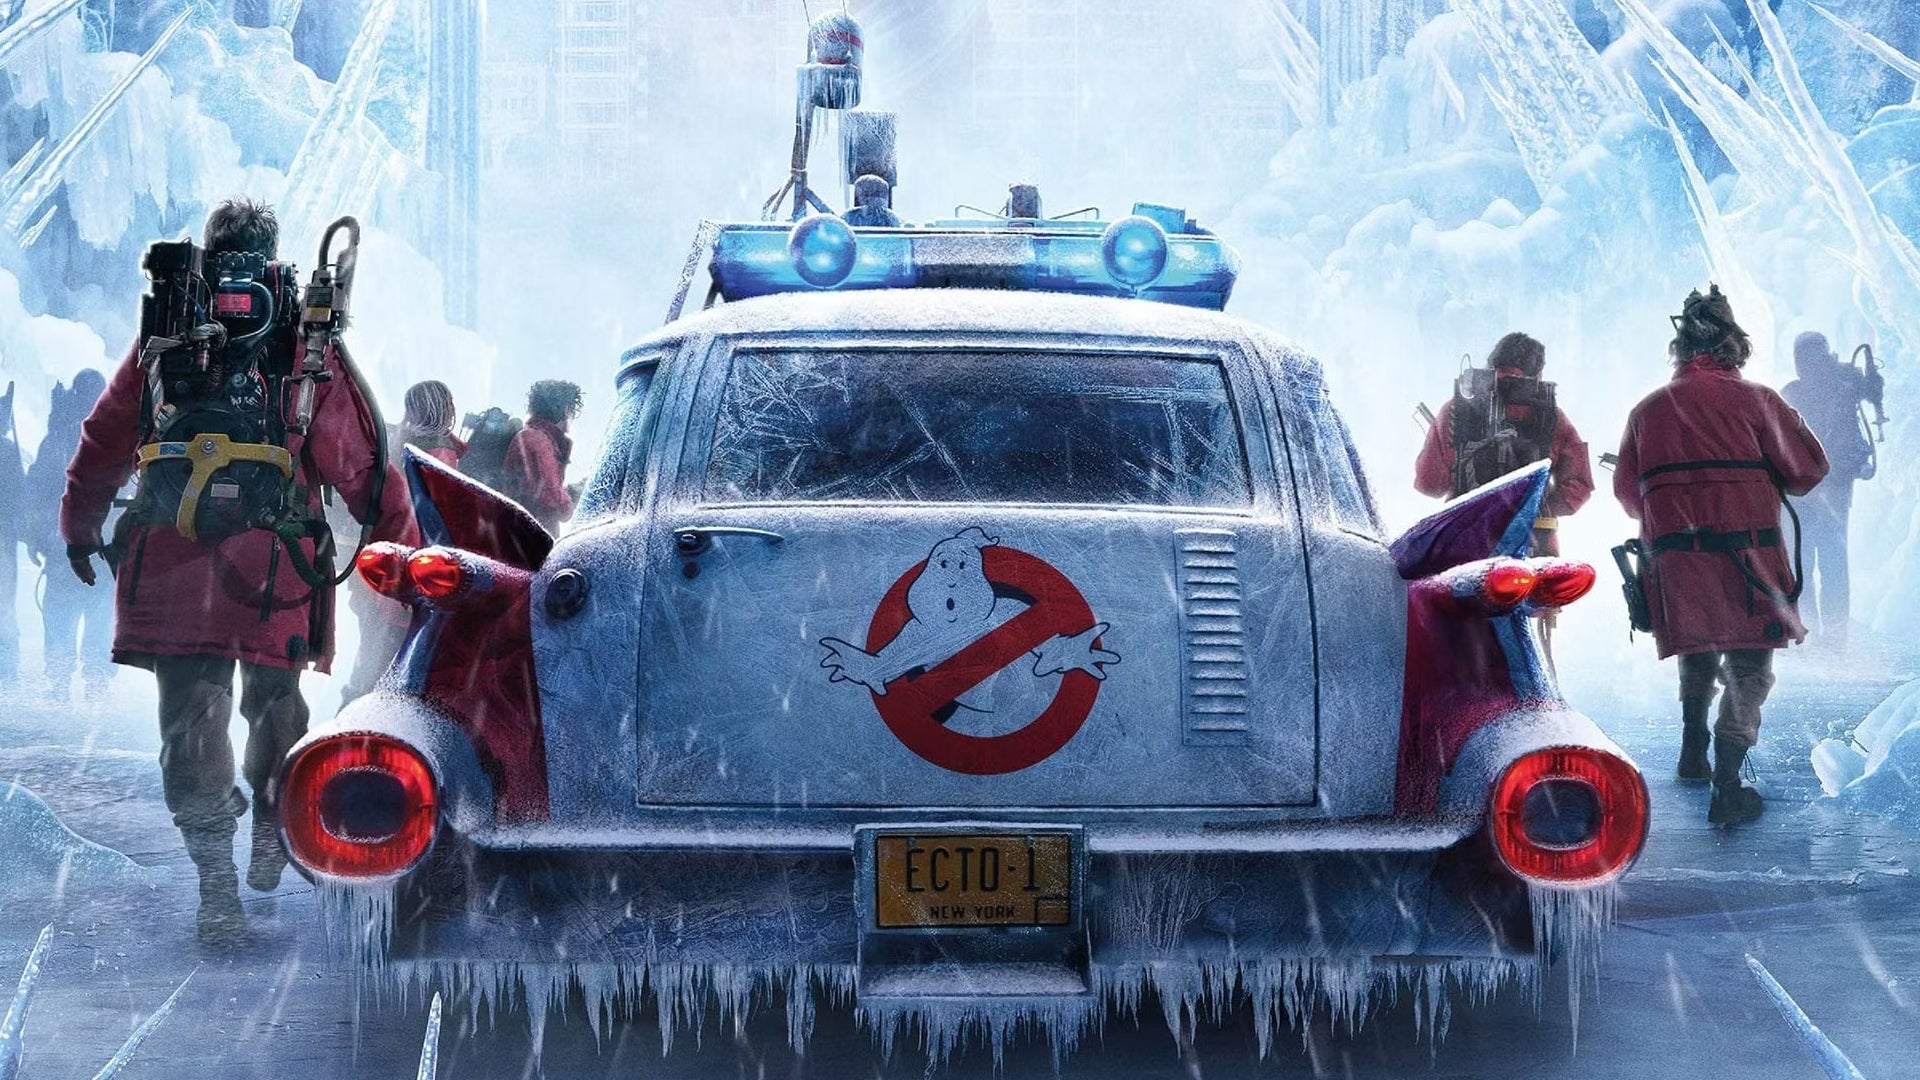 Ghostbusters Ice Empire is inspired by the series' OG animated show